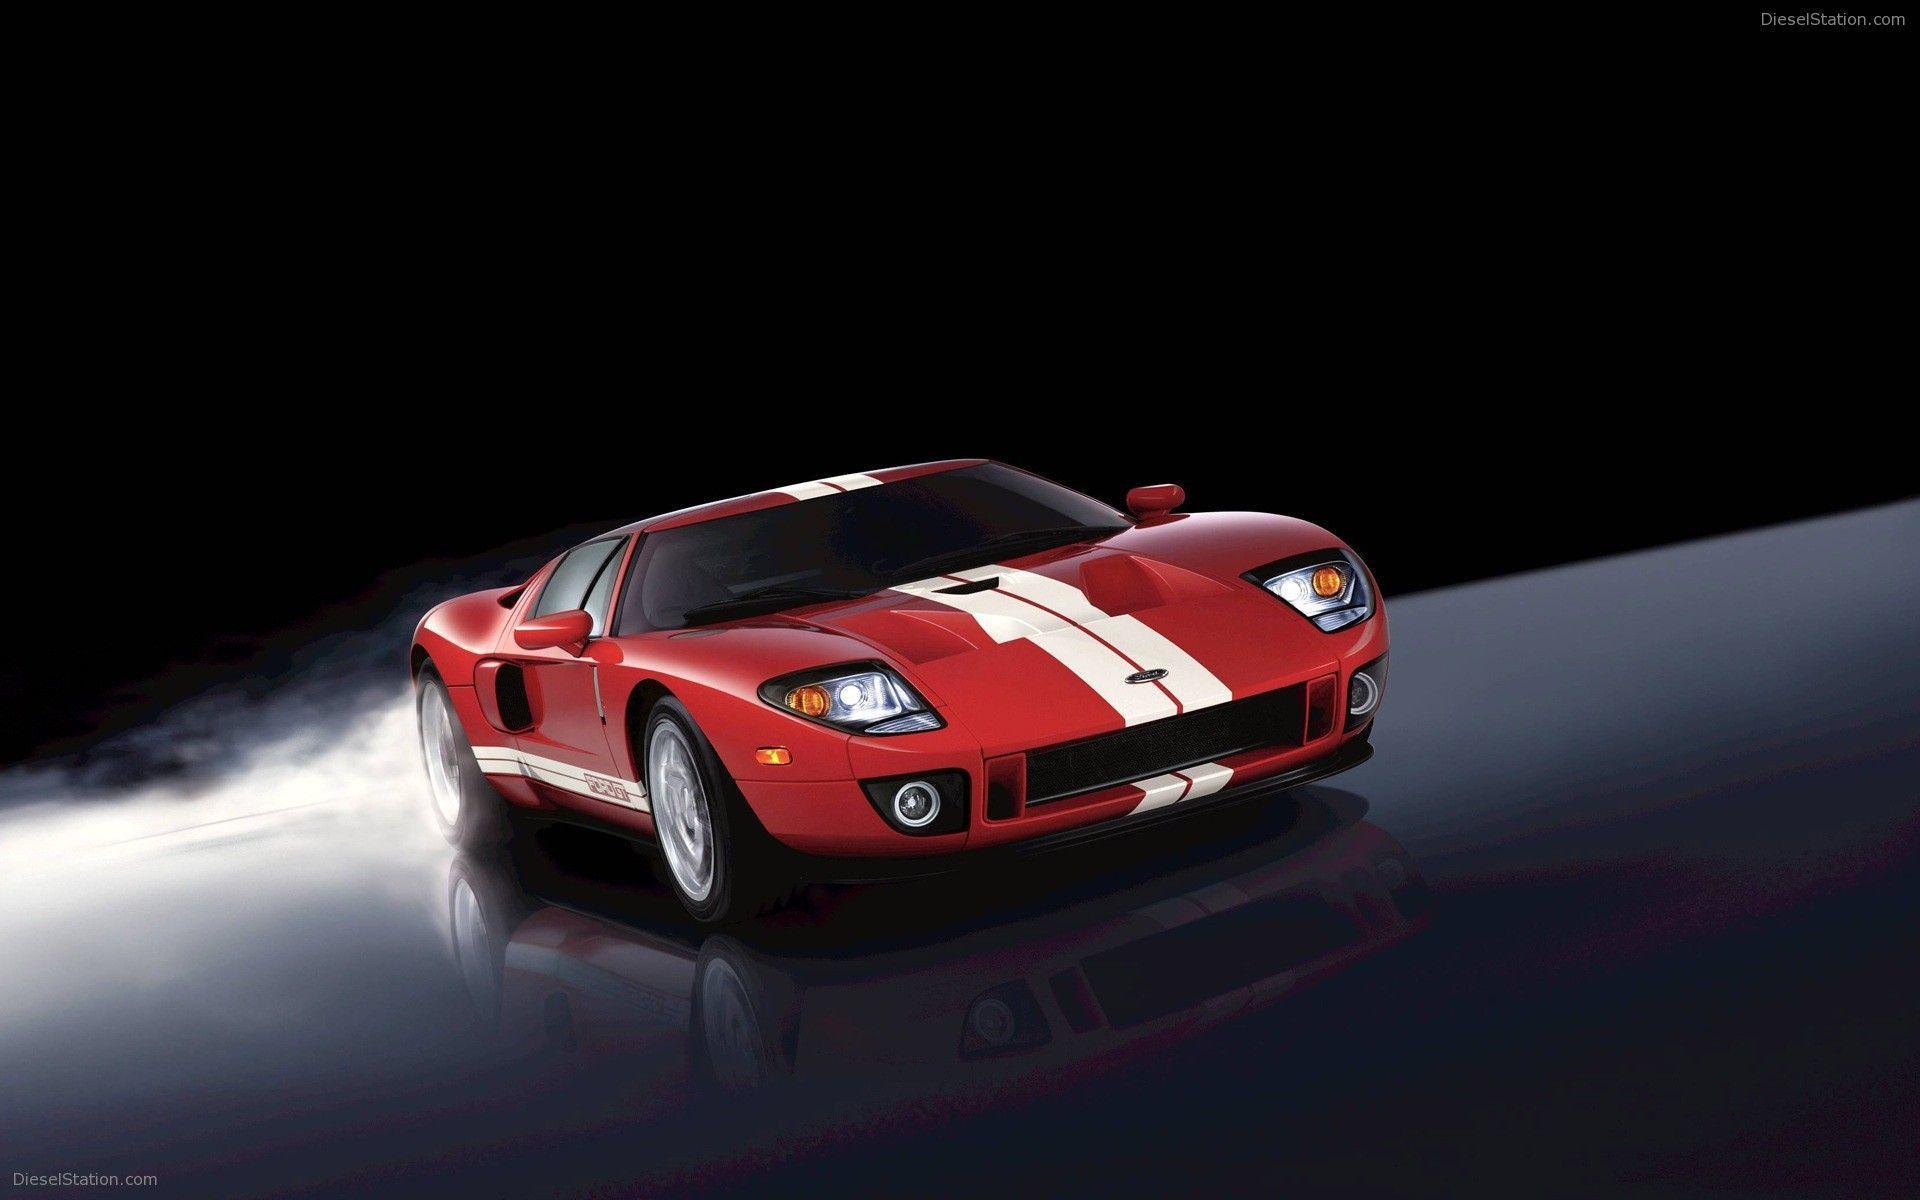 Ford Gt40 Wallpapers High Resolution Wallpapers Cars Ford Gt Car